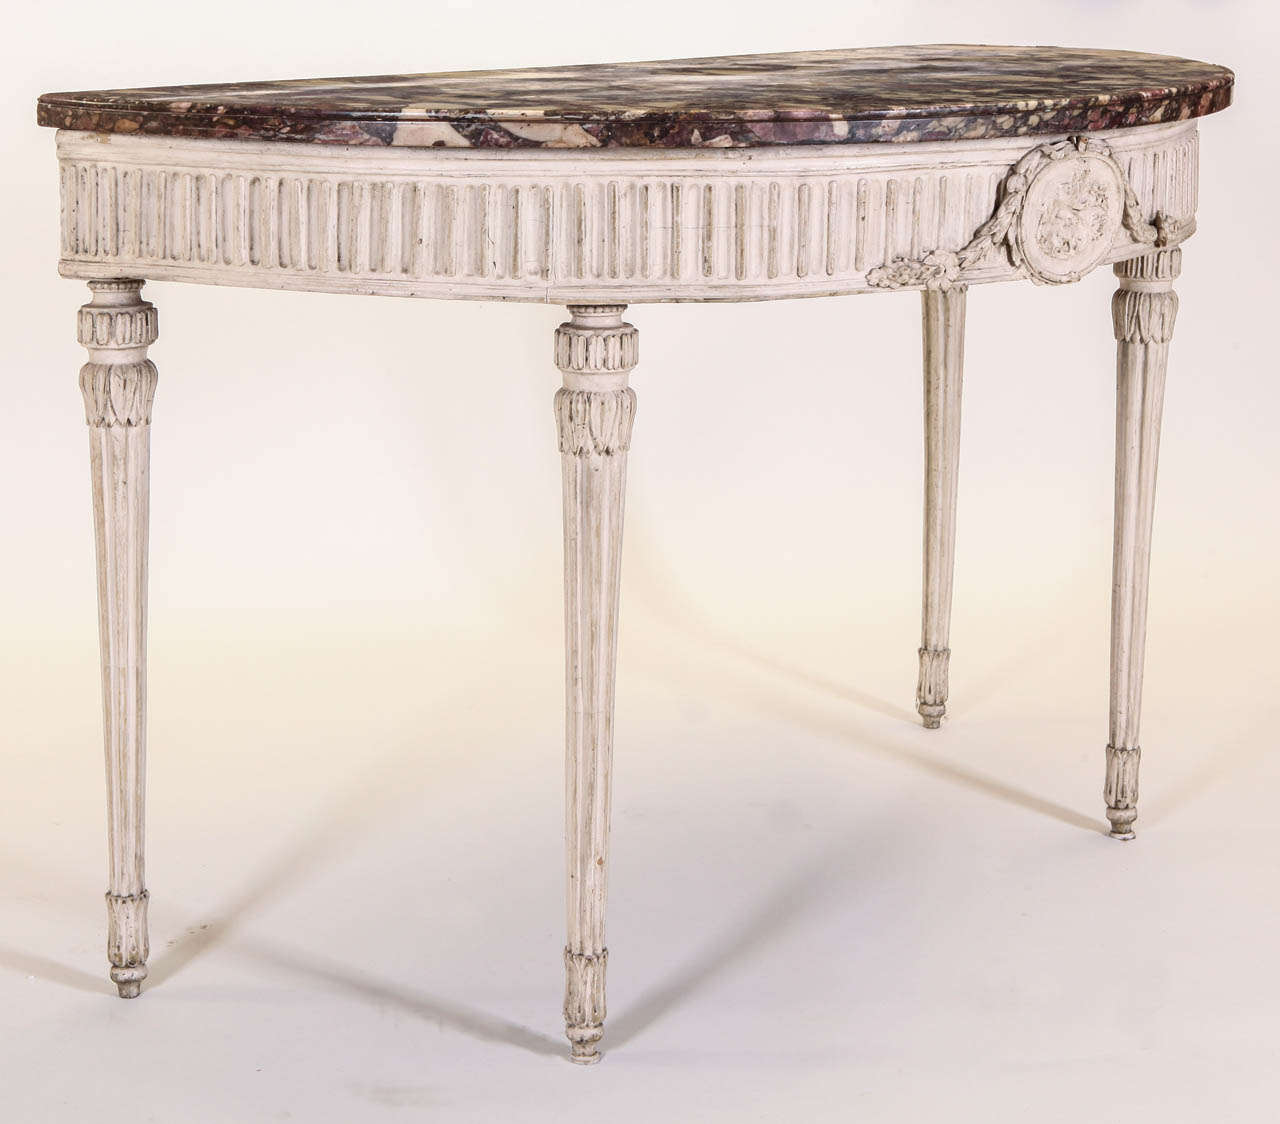 Italian 18th Century Demilune Ivory Painted Console Table Louis XVI Period For Sale 1